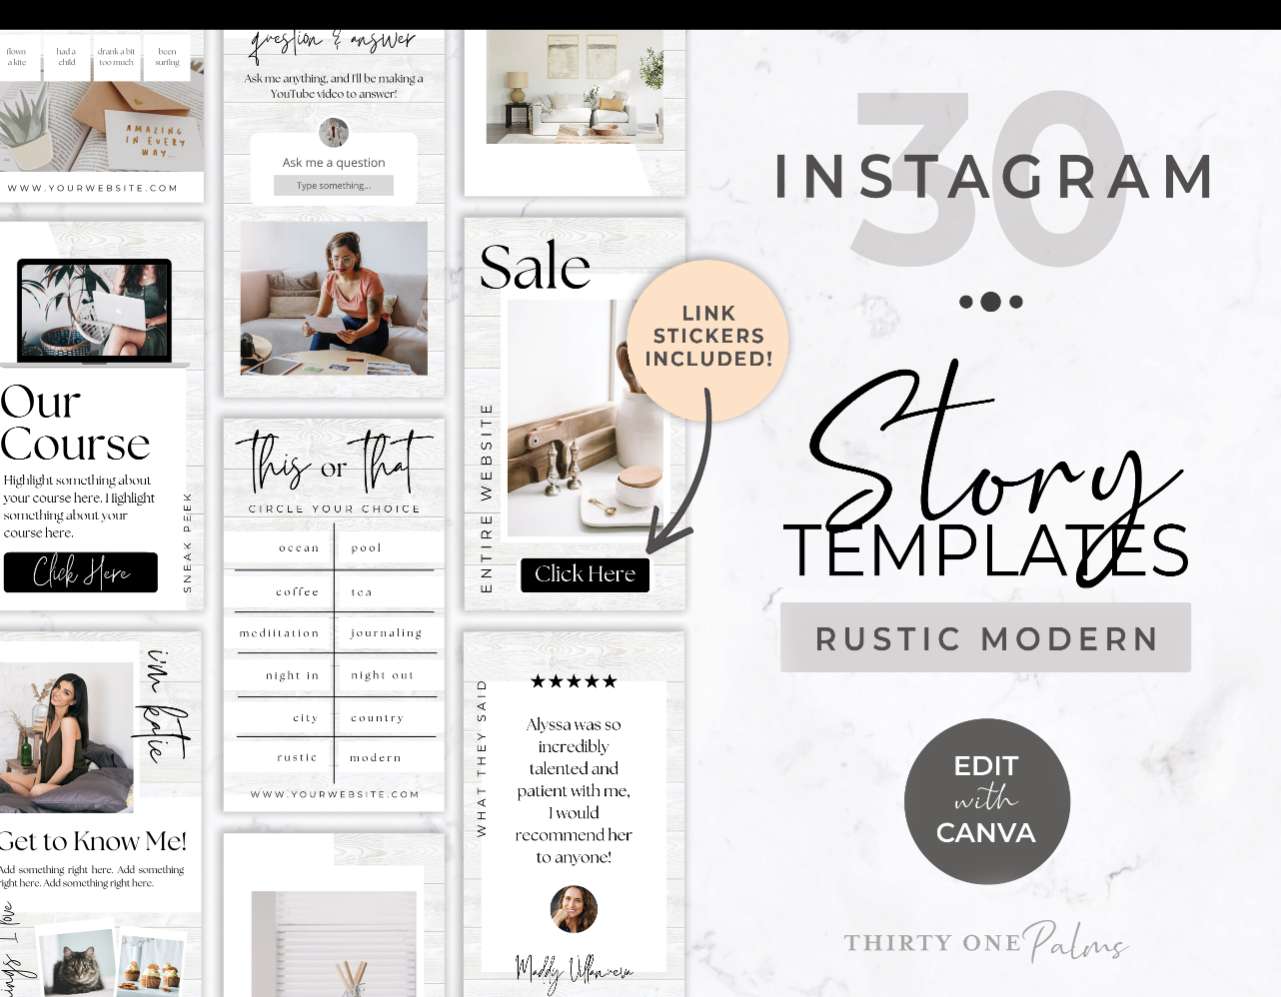 Instagram Story Templates for Canva – Rustic Modern